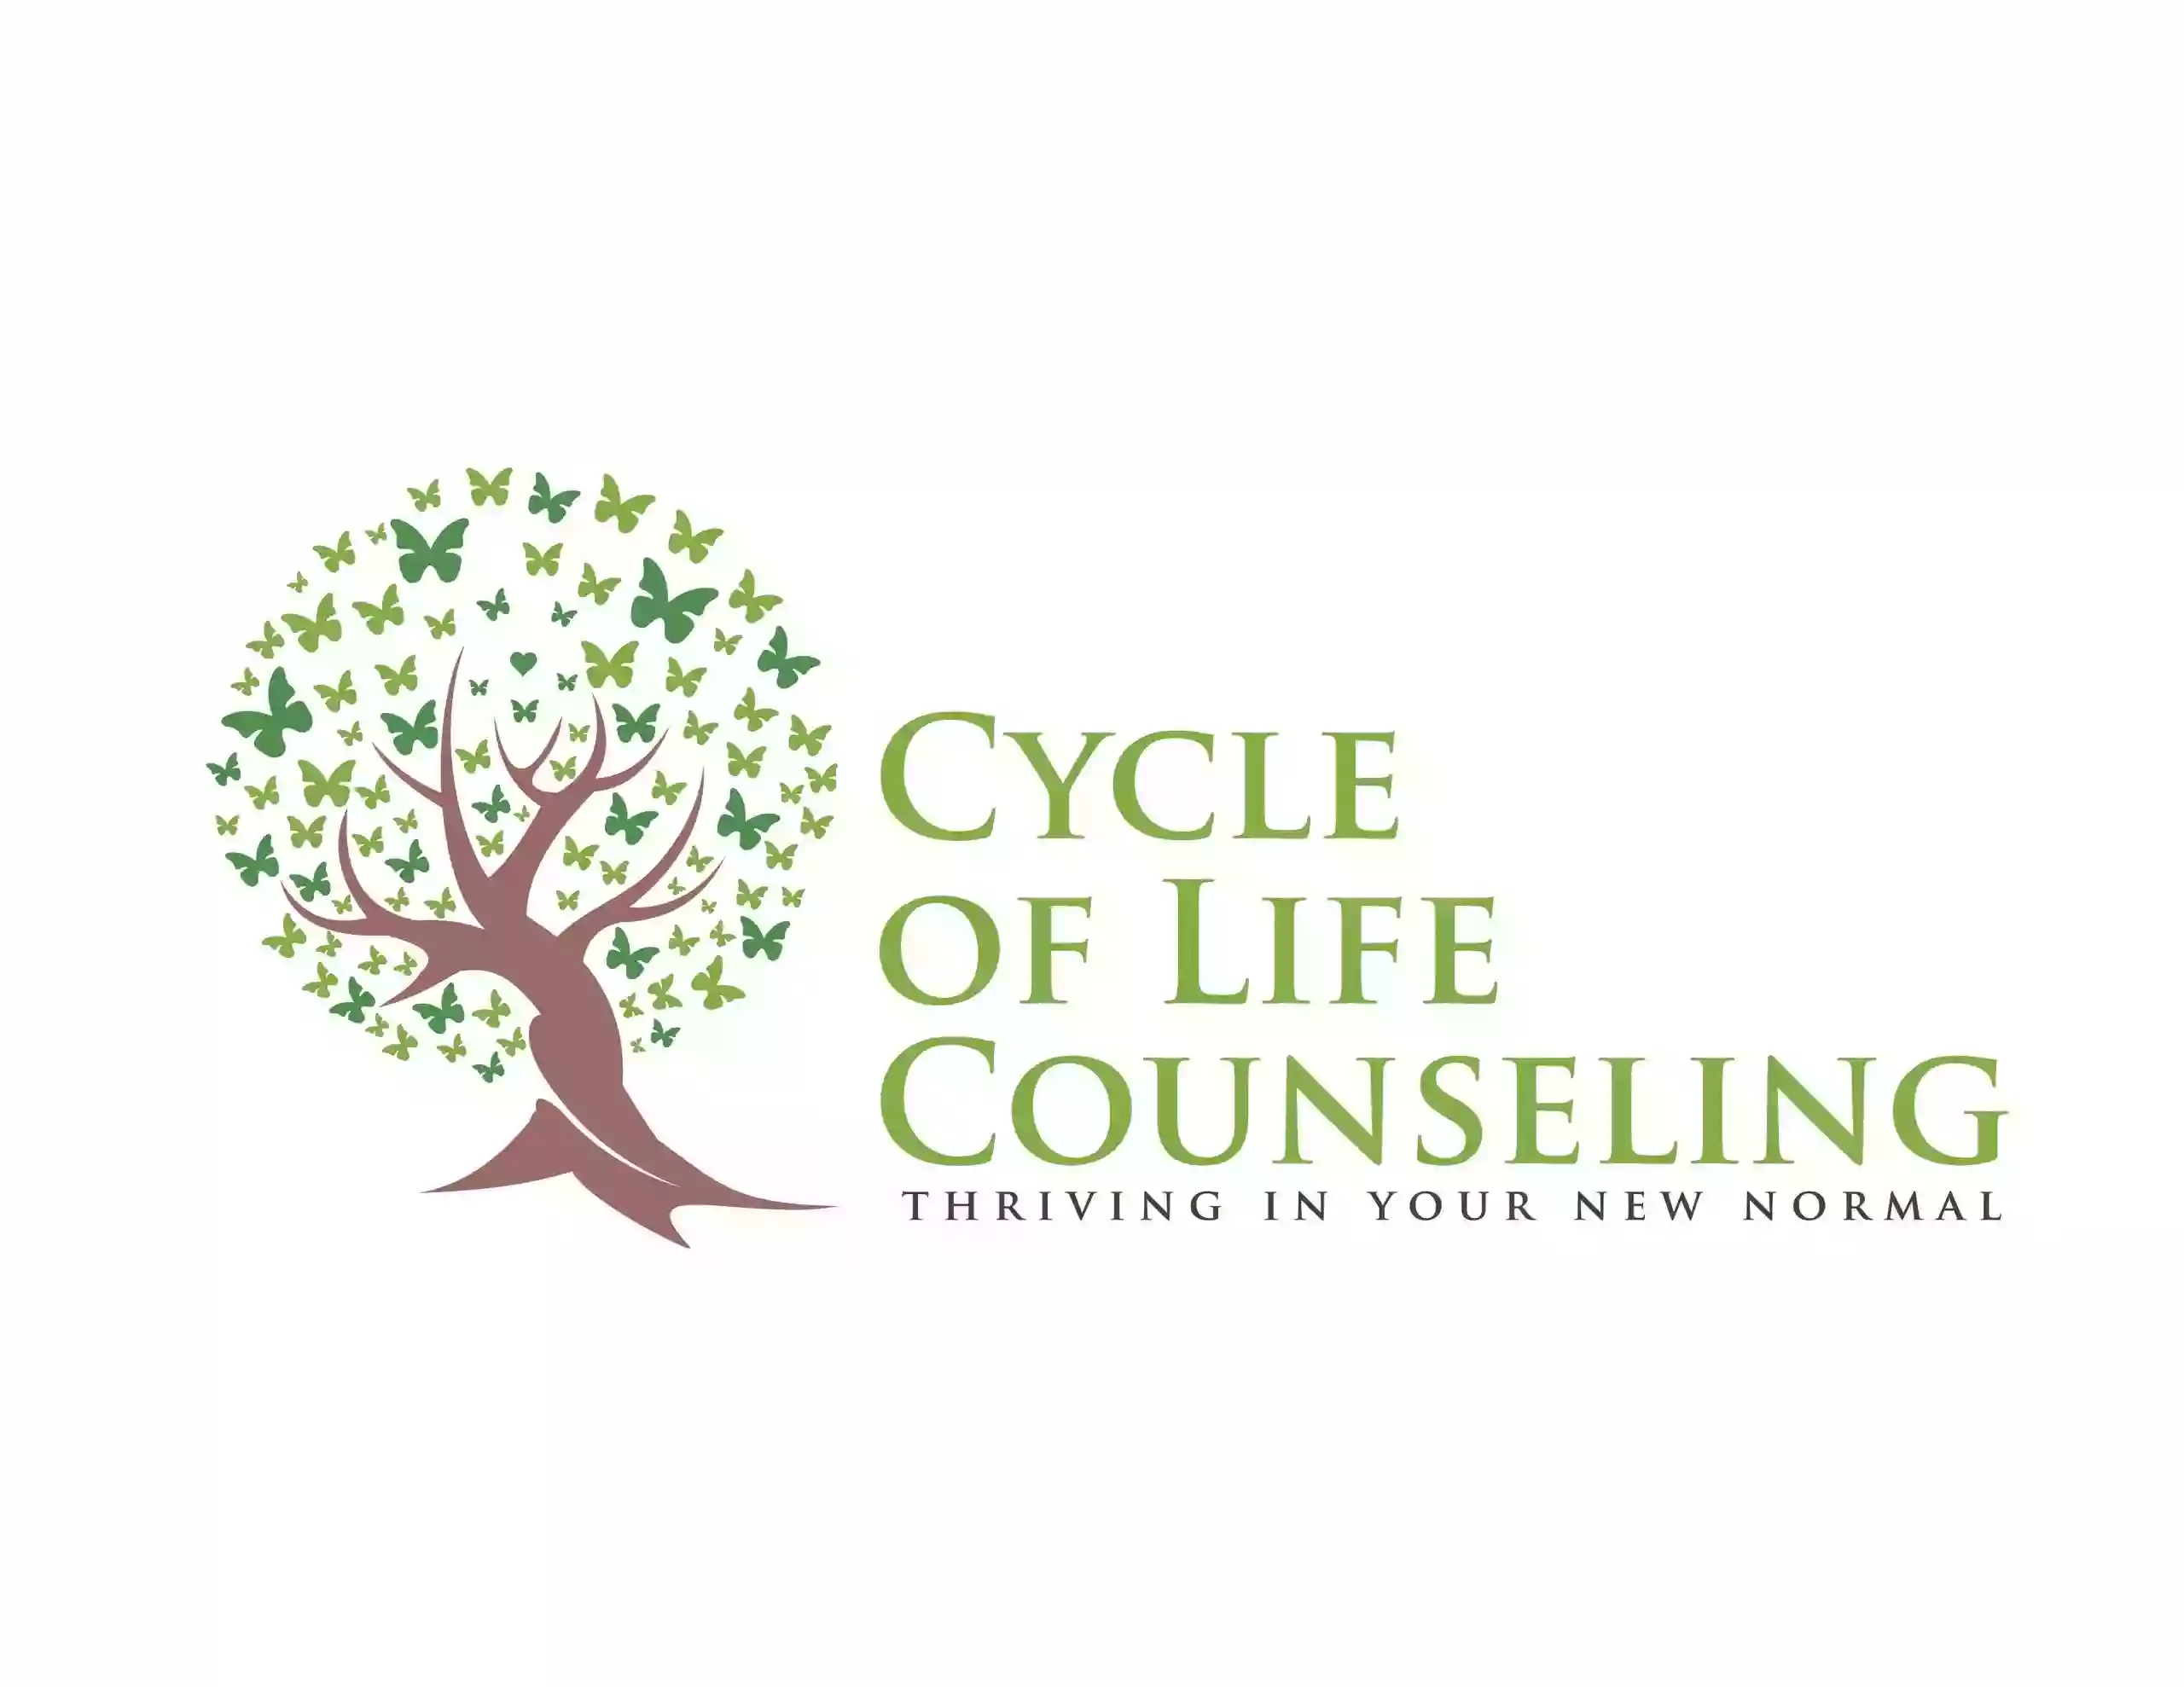 Cycle of Life Counseling